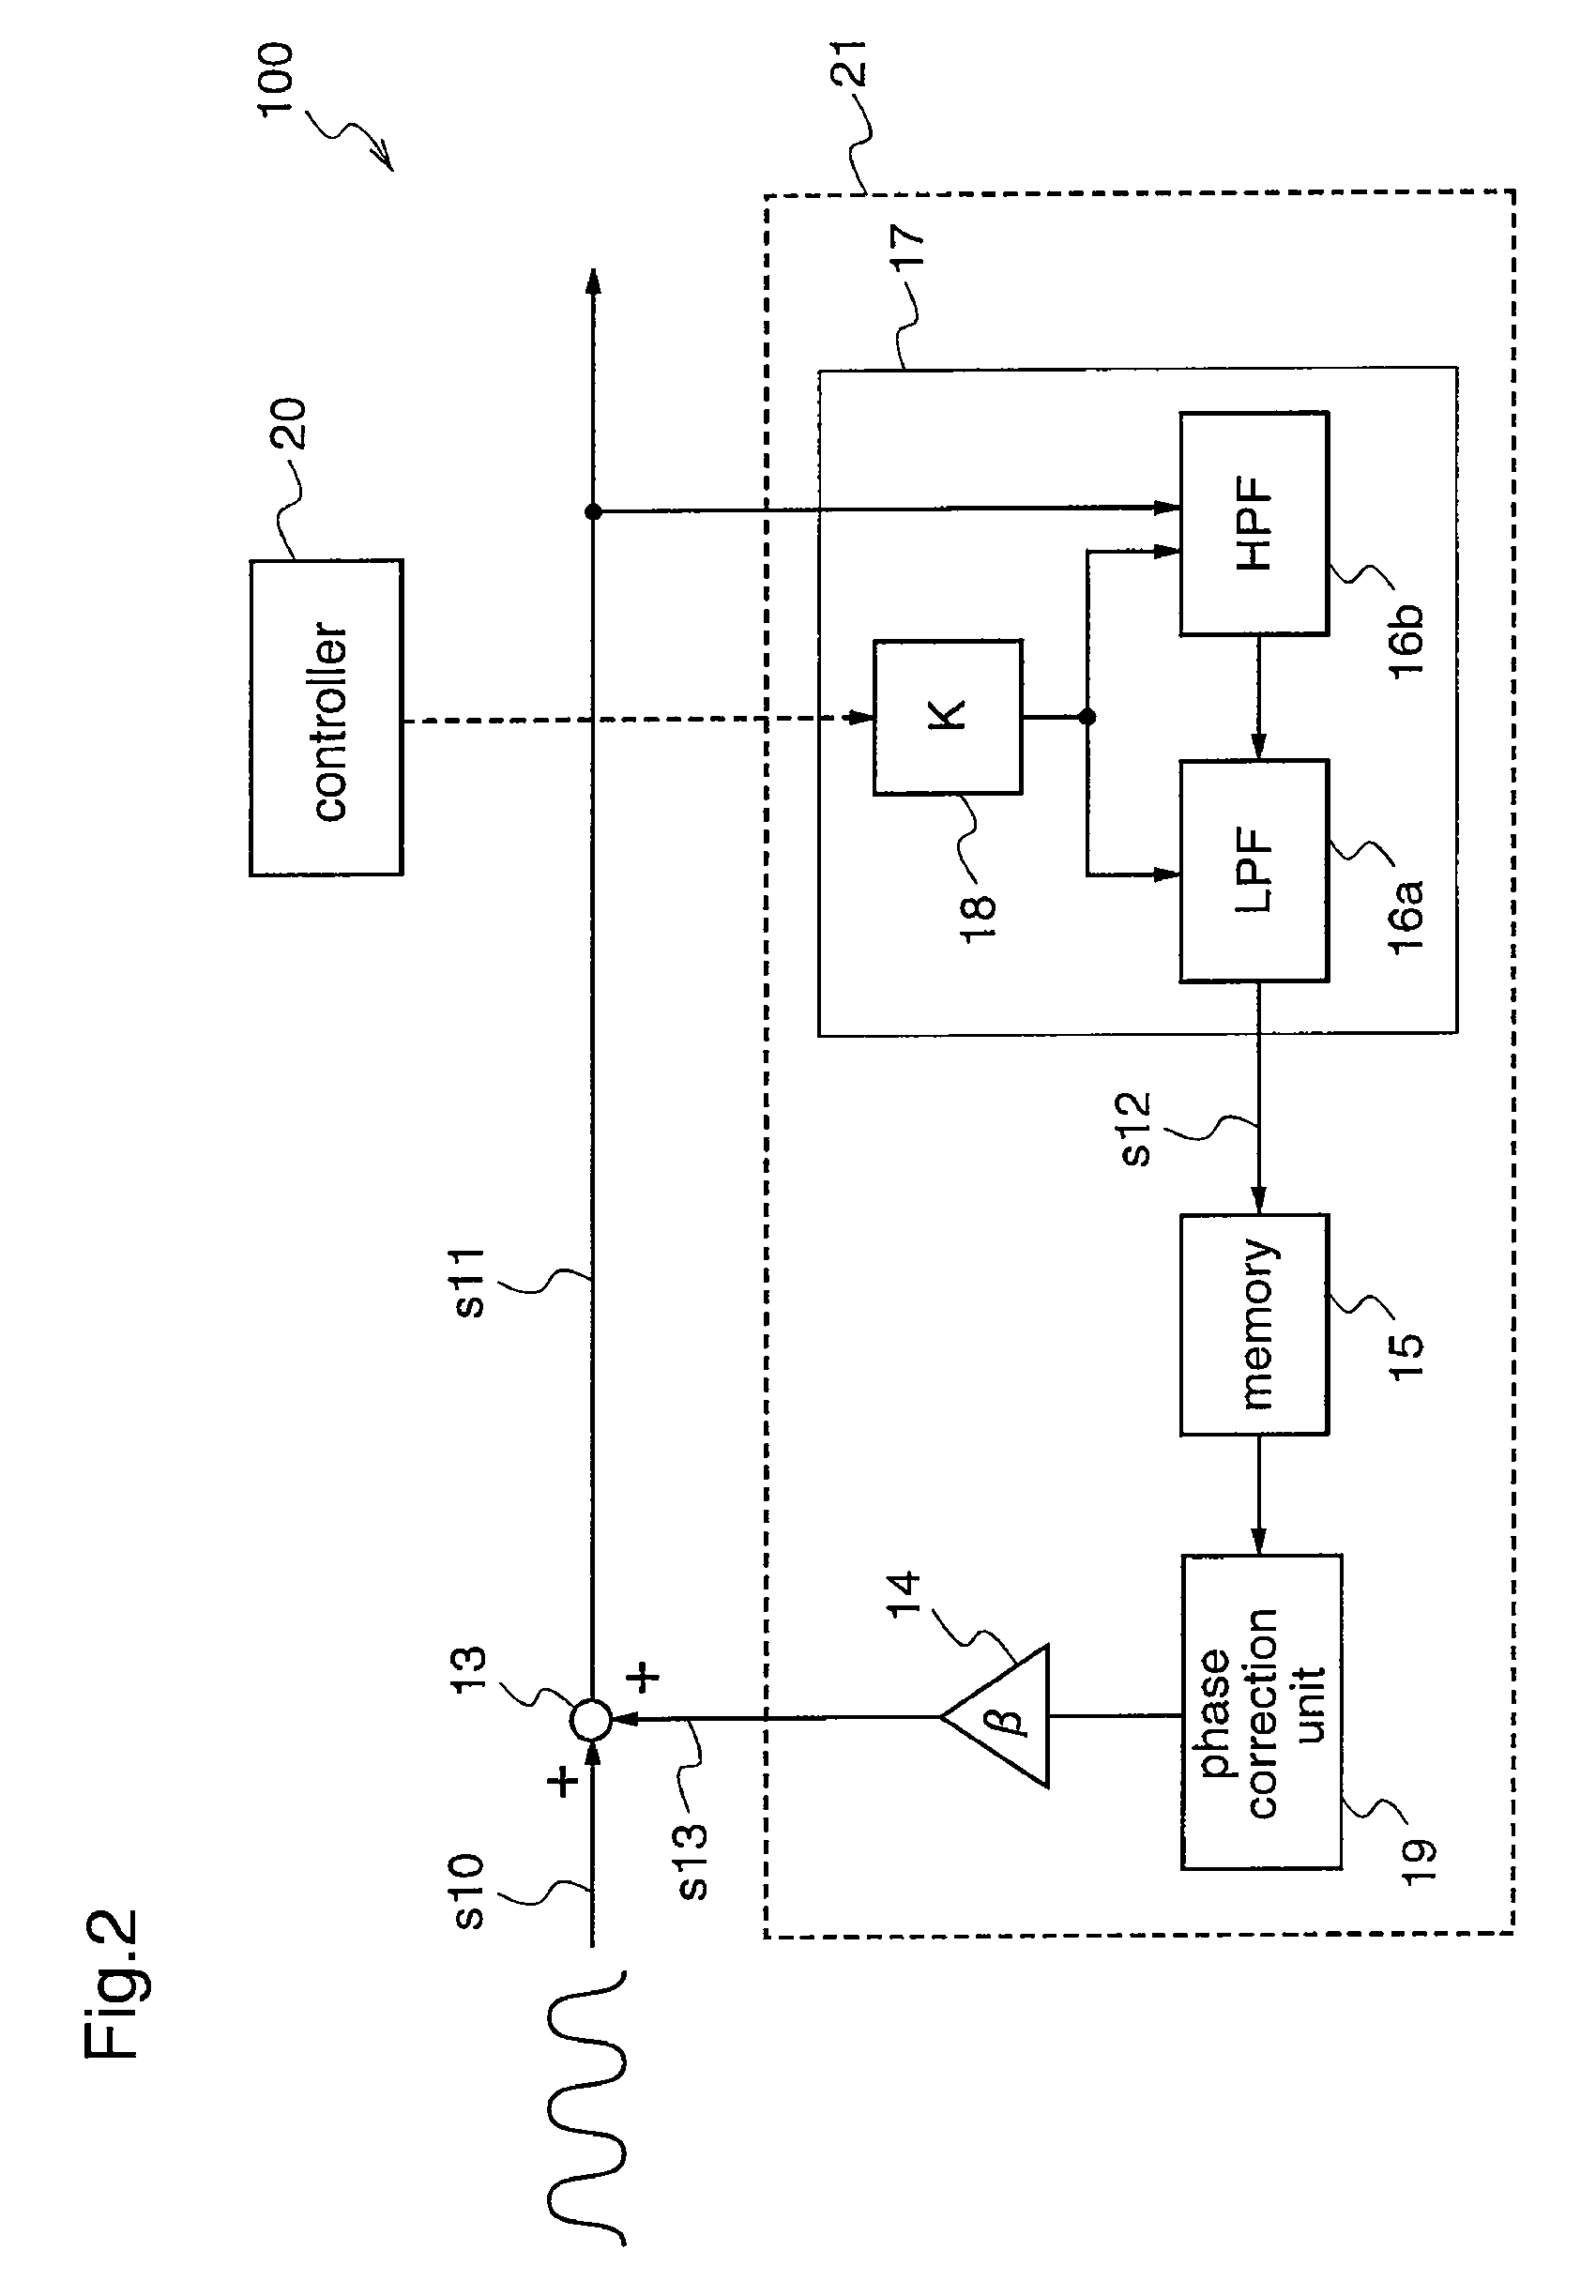 Cyclic memory and disc device